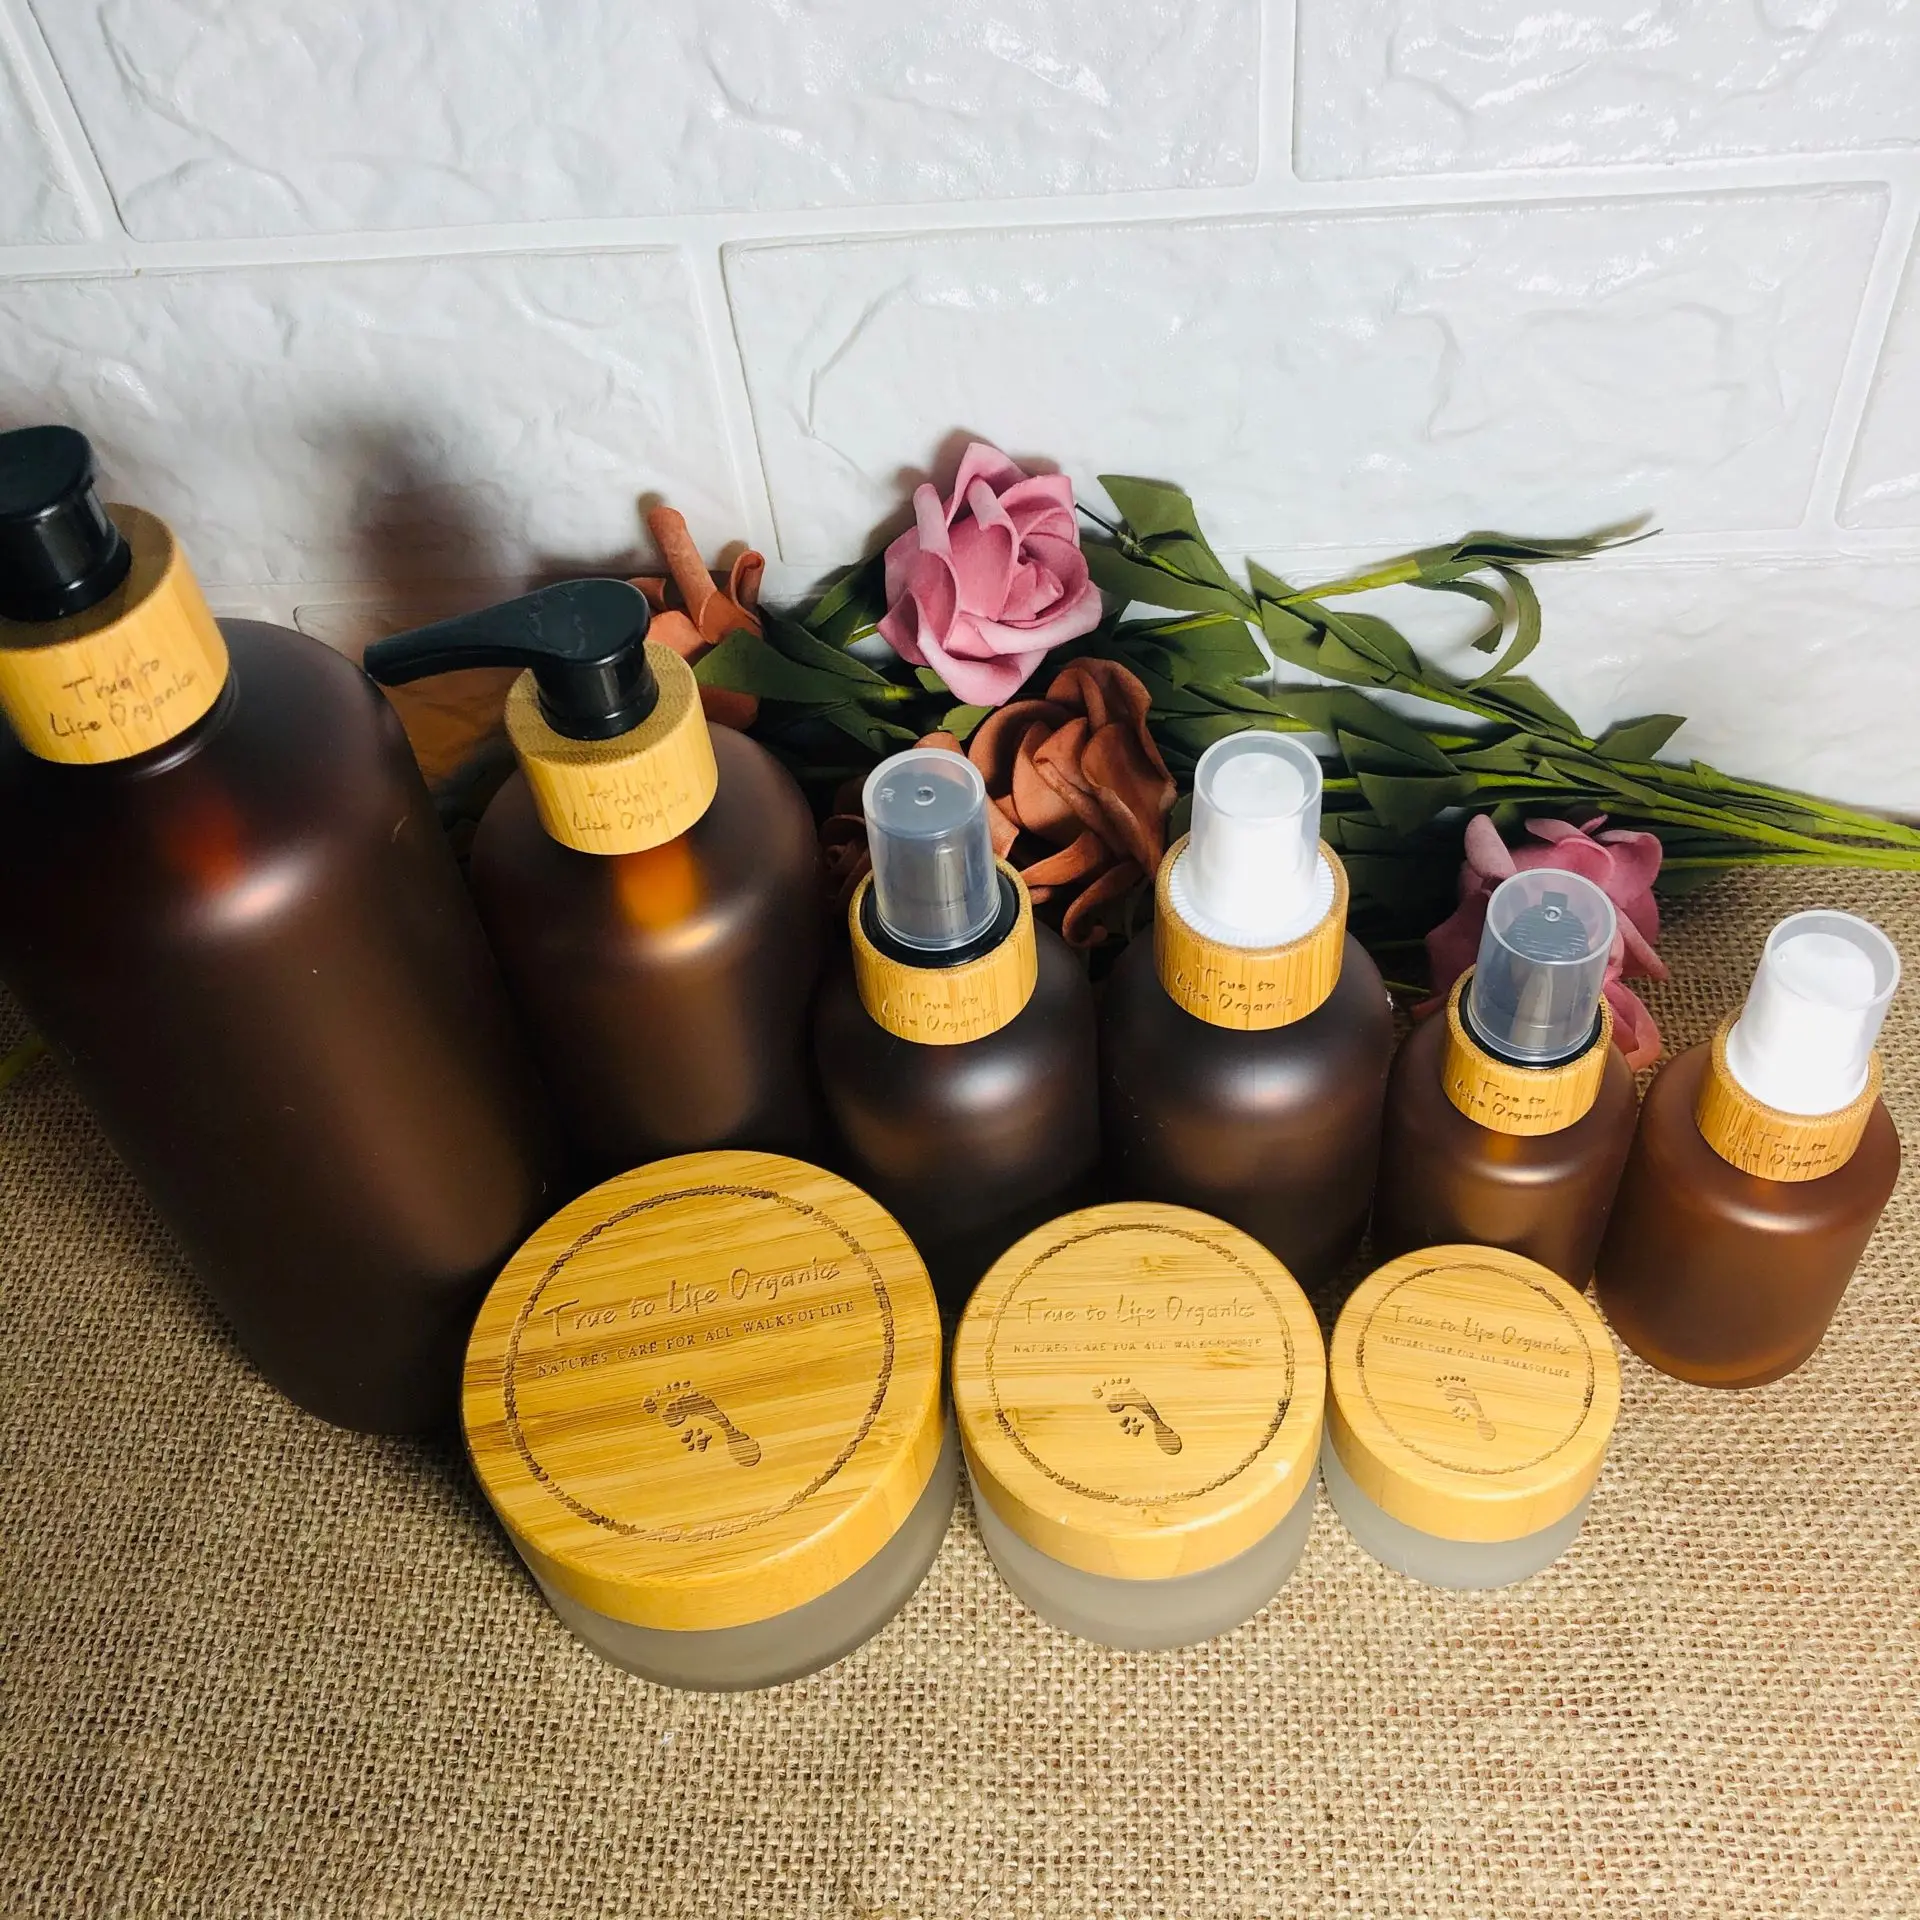 Wholesale Empty Amber Cosmetic Container Jar Plastic PET Beauty Hair Tools Shampoo Hand Wash Lotion Pump Bottles With Bamboo Cap shampoo dispenser for bathroom transparent glass bottles press type refillable shampoo box for shampoo body wash mouthwash